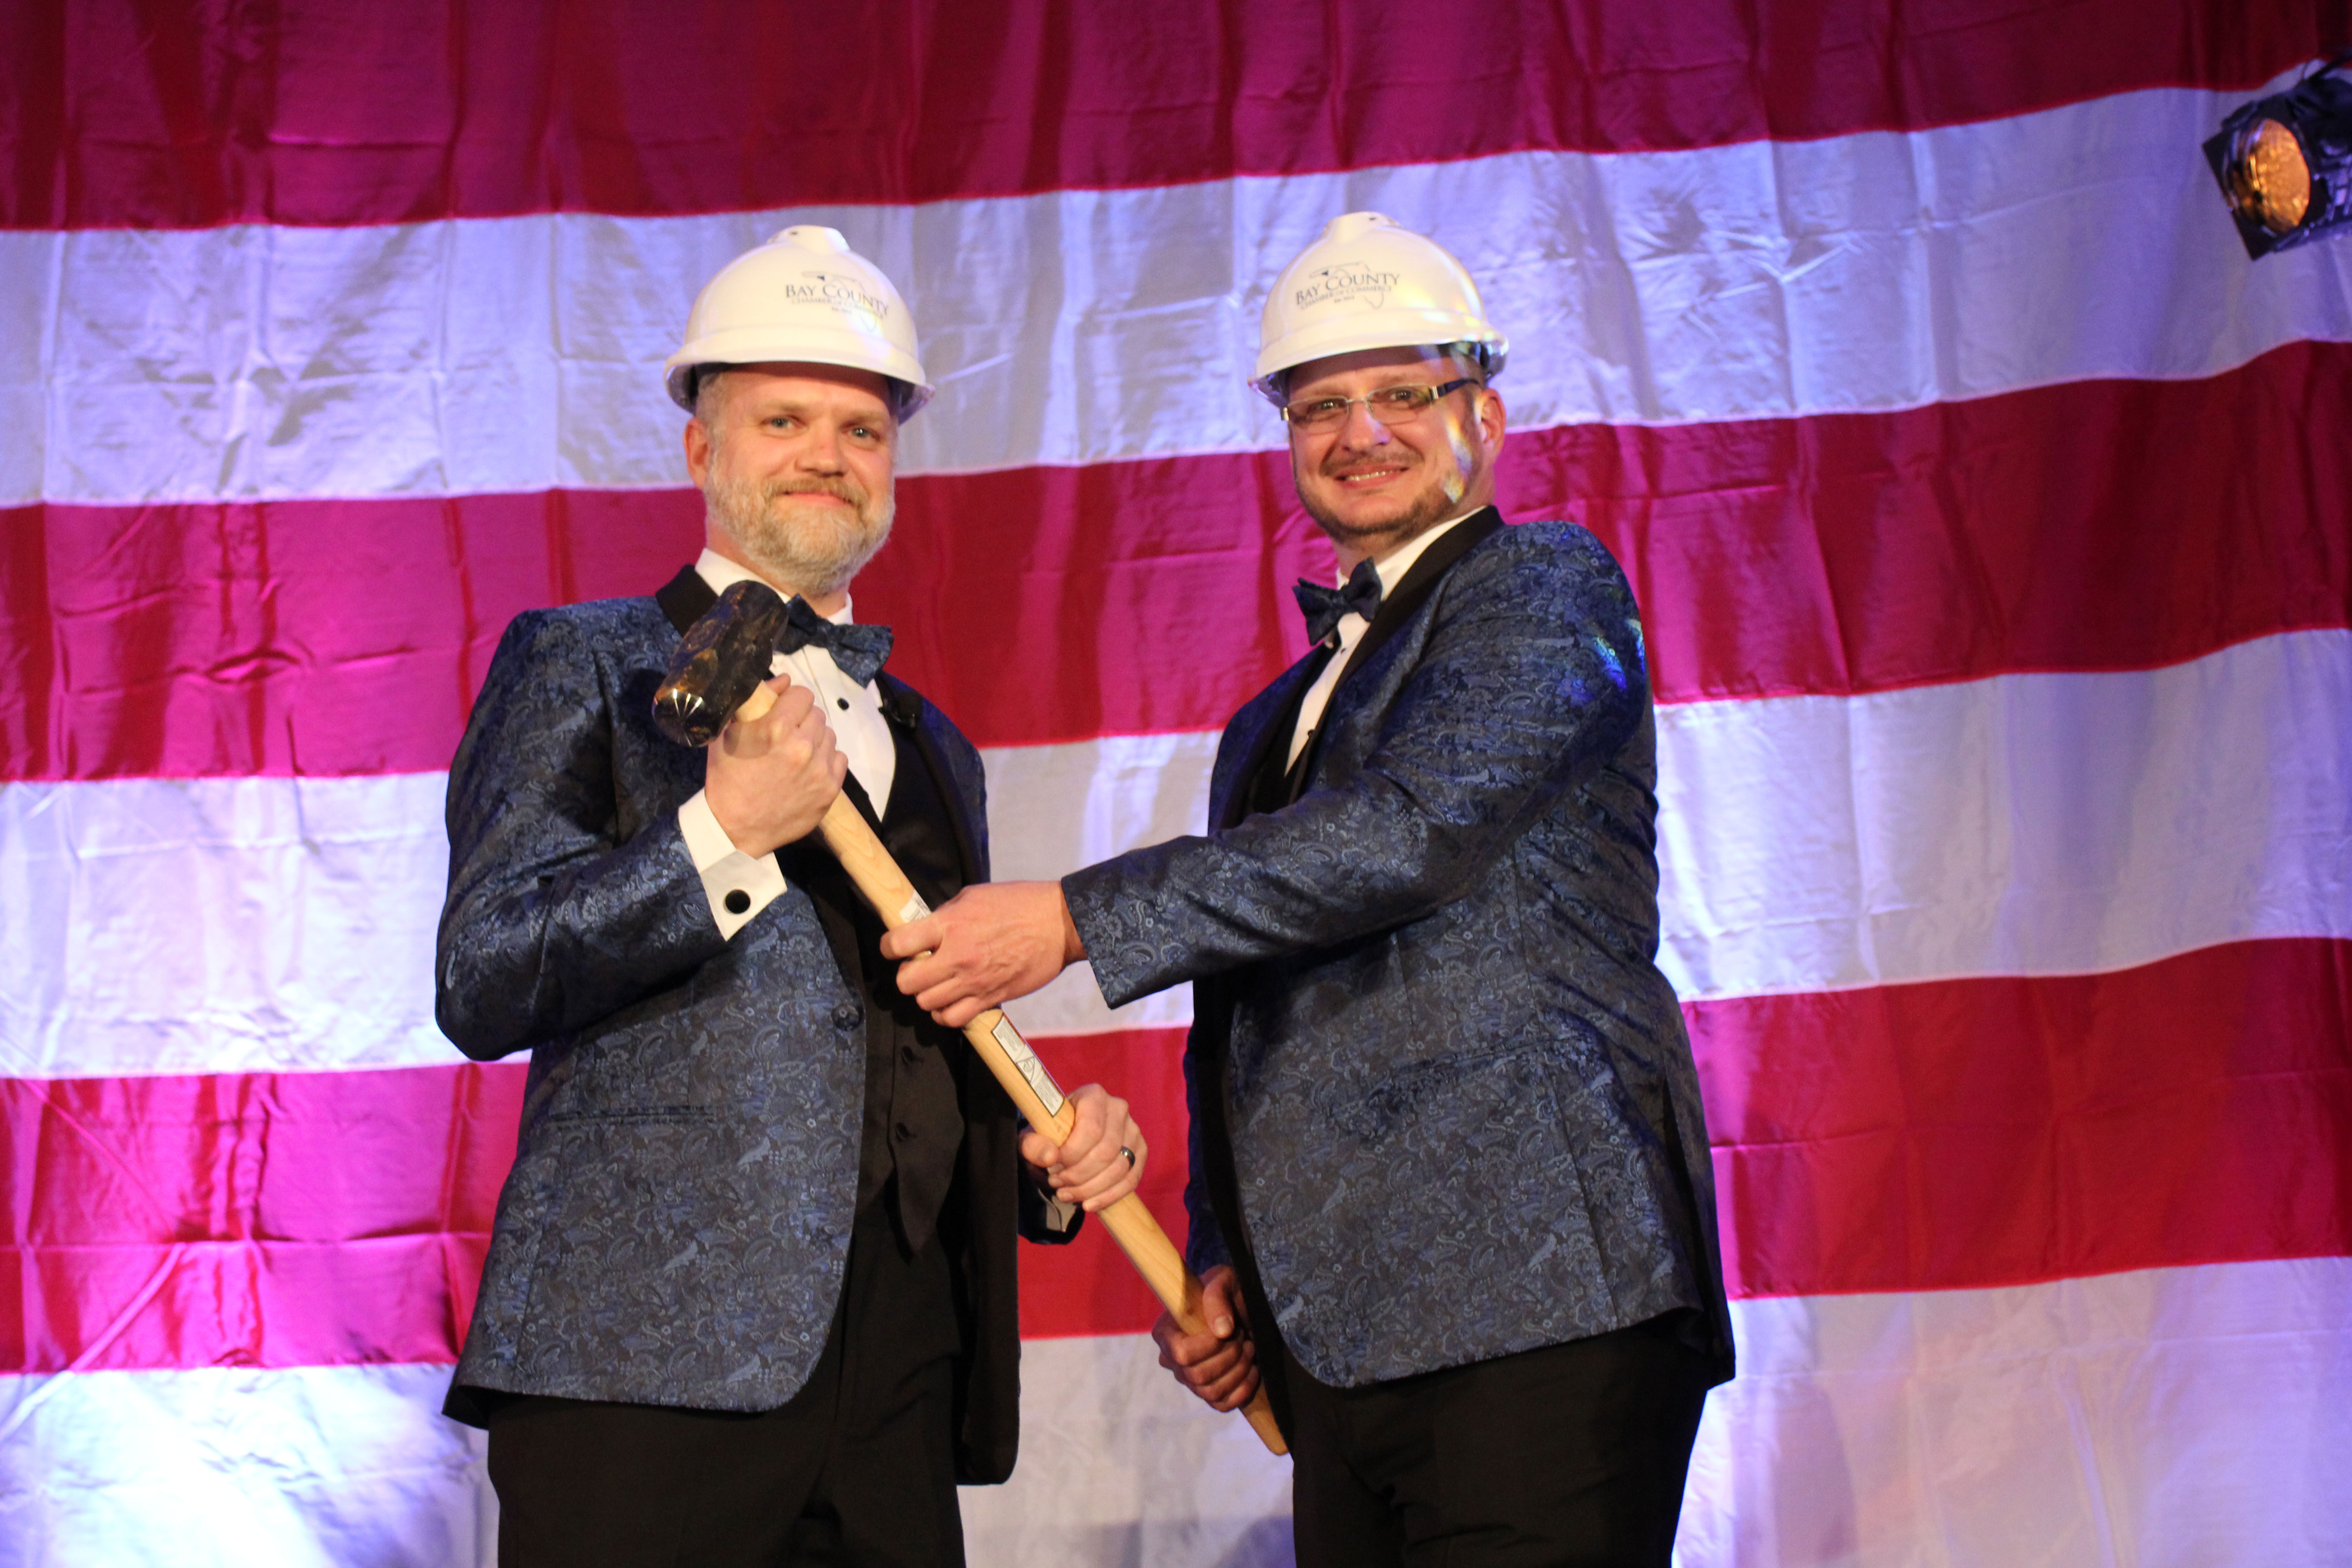 2018 Chair of the Board, Will Cramer, "passes the gavel" to incoming 2019 Chair of the Board, Doug Moore, at the 2019 Annual Dinner and Awards Ceremony.